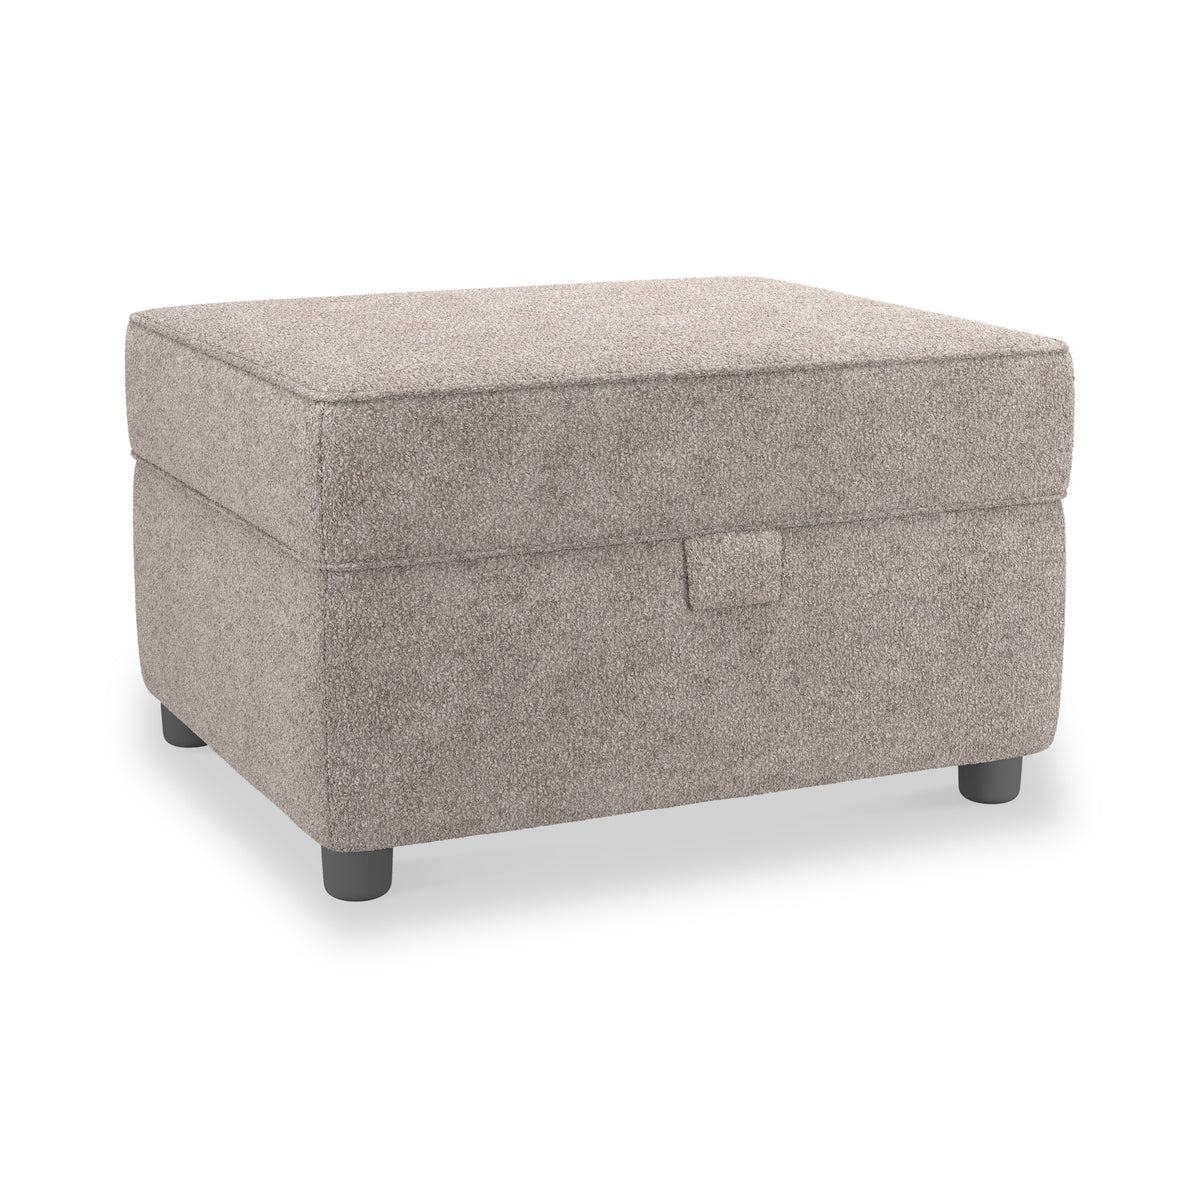 Jessie Mink Small Storage Footstool from Roseland Furniture